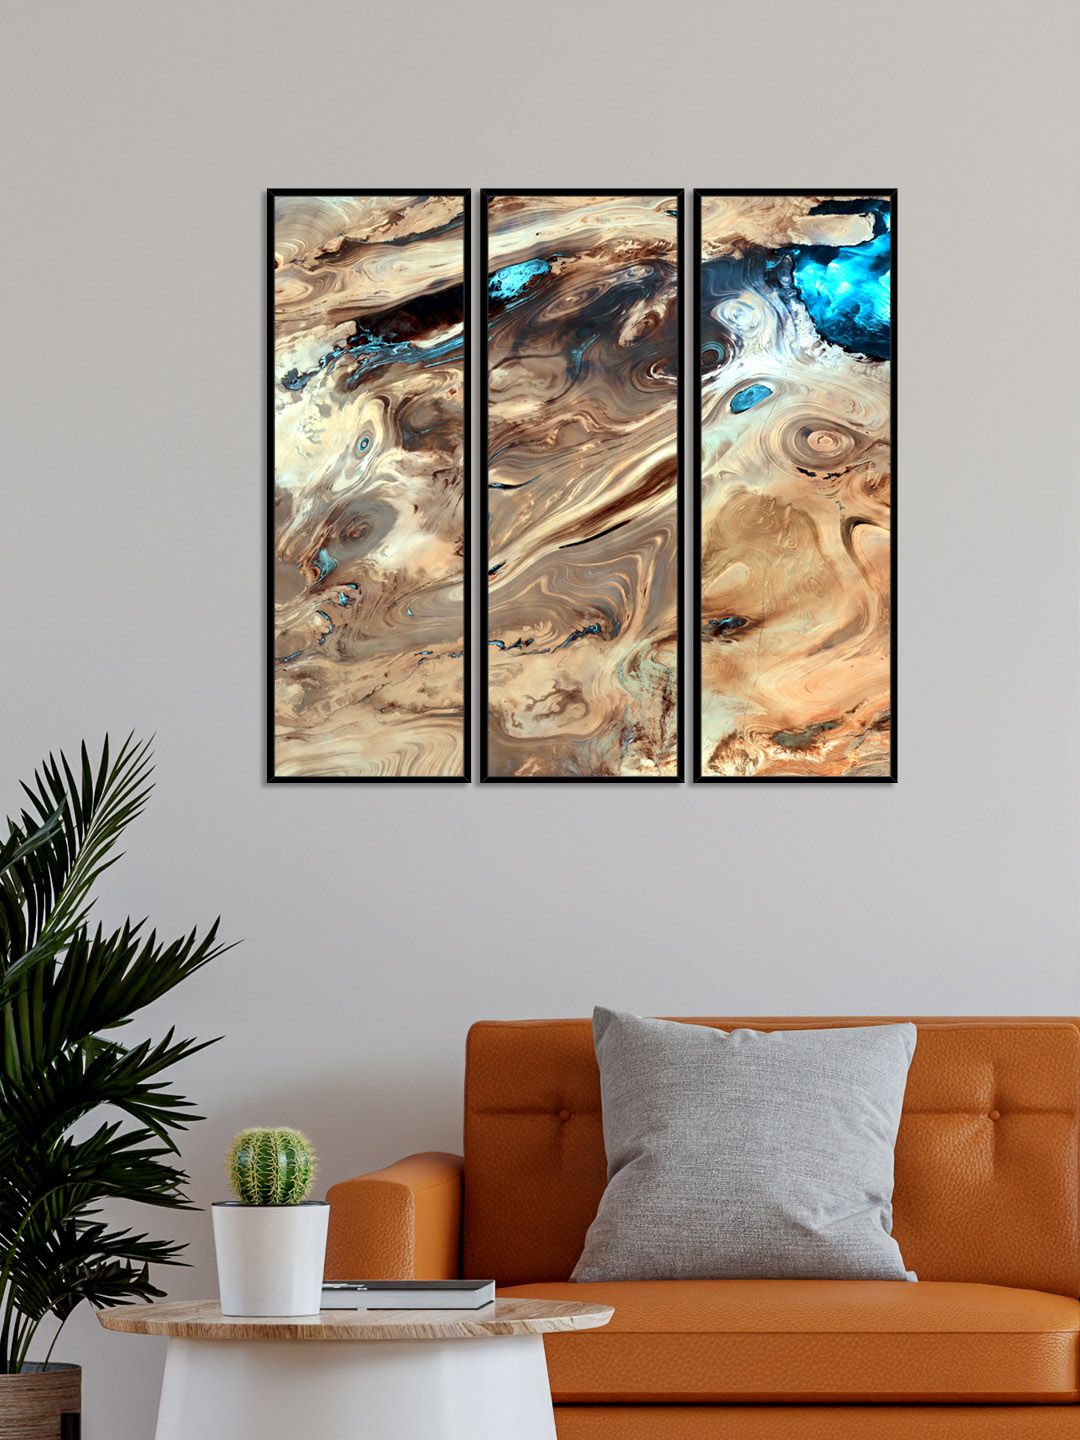 999Store Set of 3 Abstract Wall Paintings Price in India